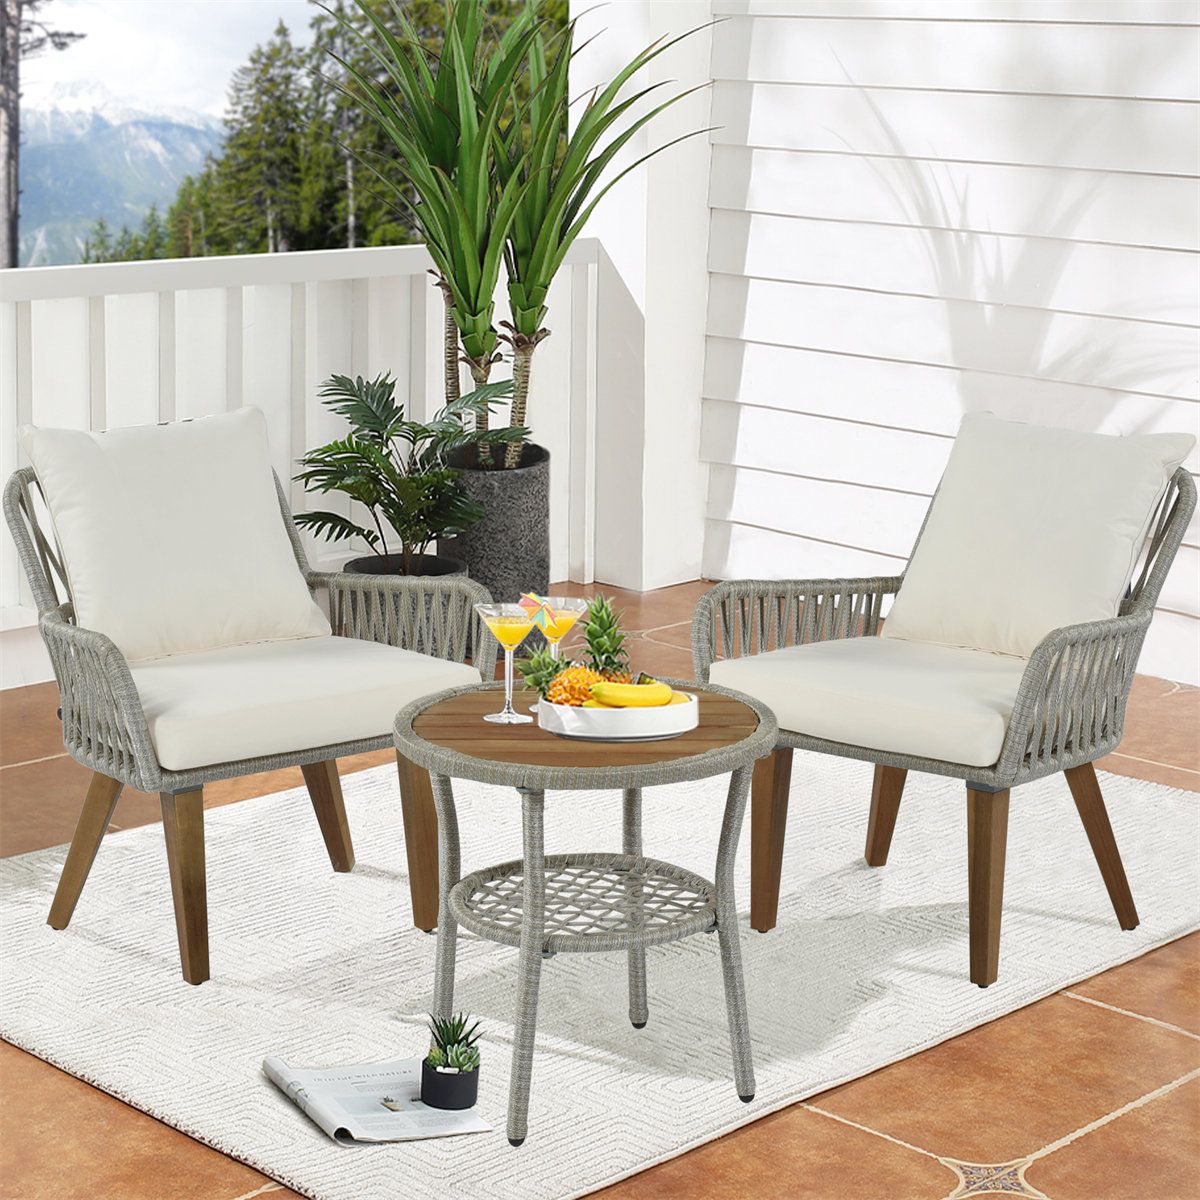 Corrigan Studio® 3 Piece Bistro Set Woven Rope Conversation Set, Wood  Tabletop And Cushions Gray Rope+beige Fabric | Wayfair For Woven Rope Outdoor 3 Piece Conversation Set (Photo 3 of 15)